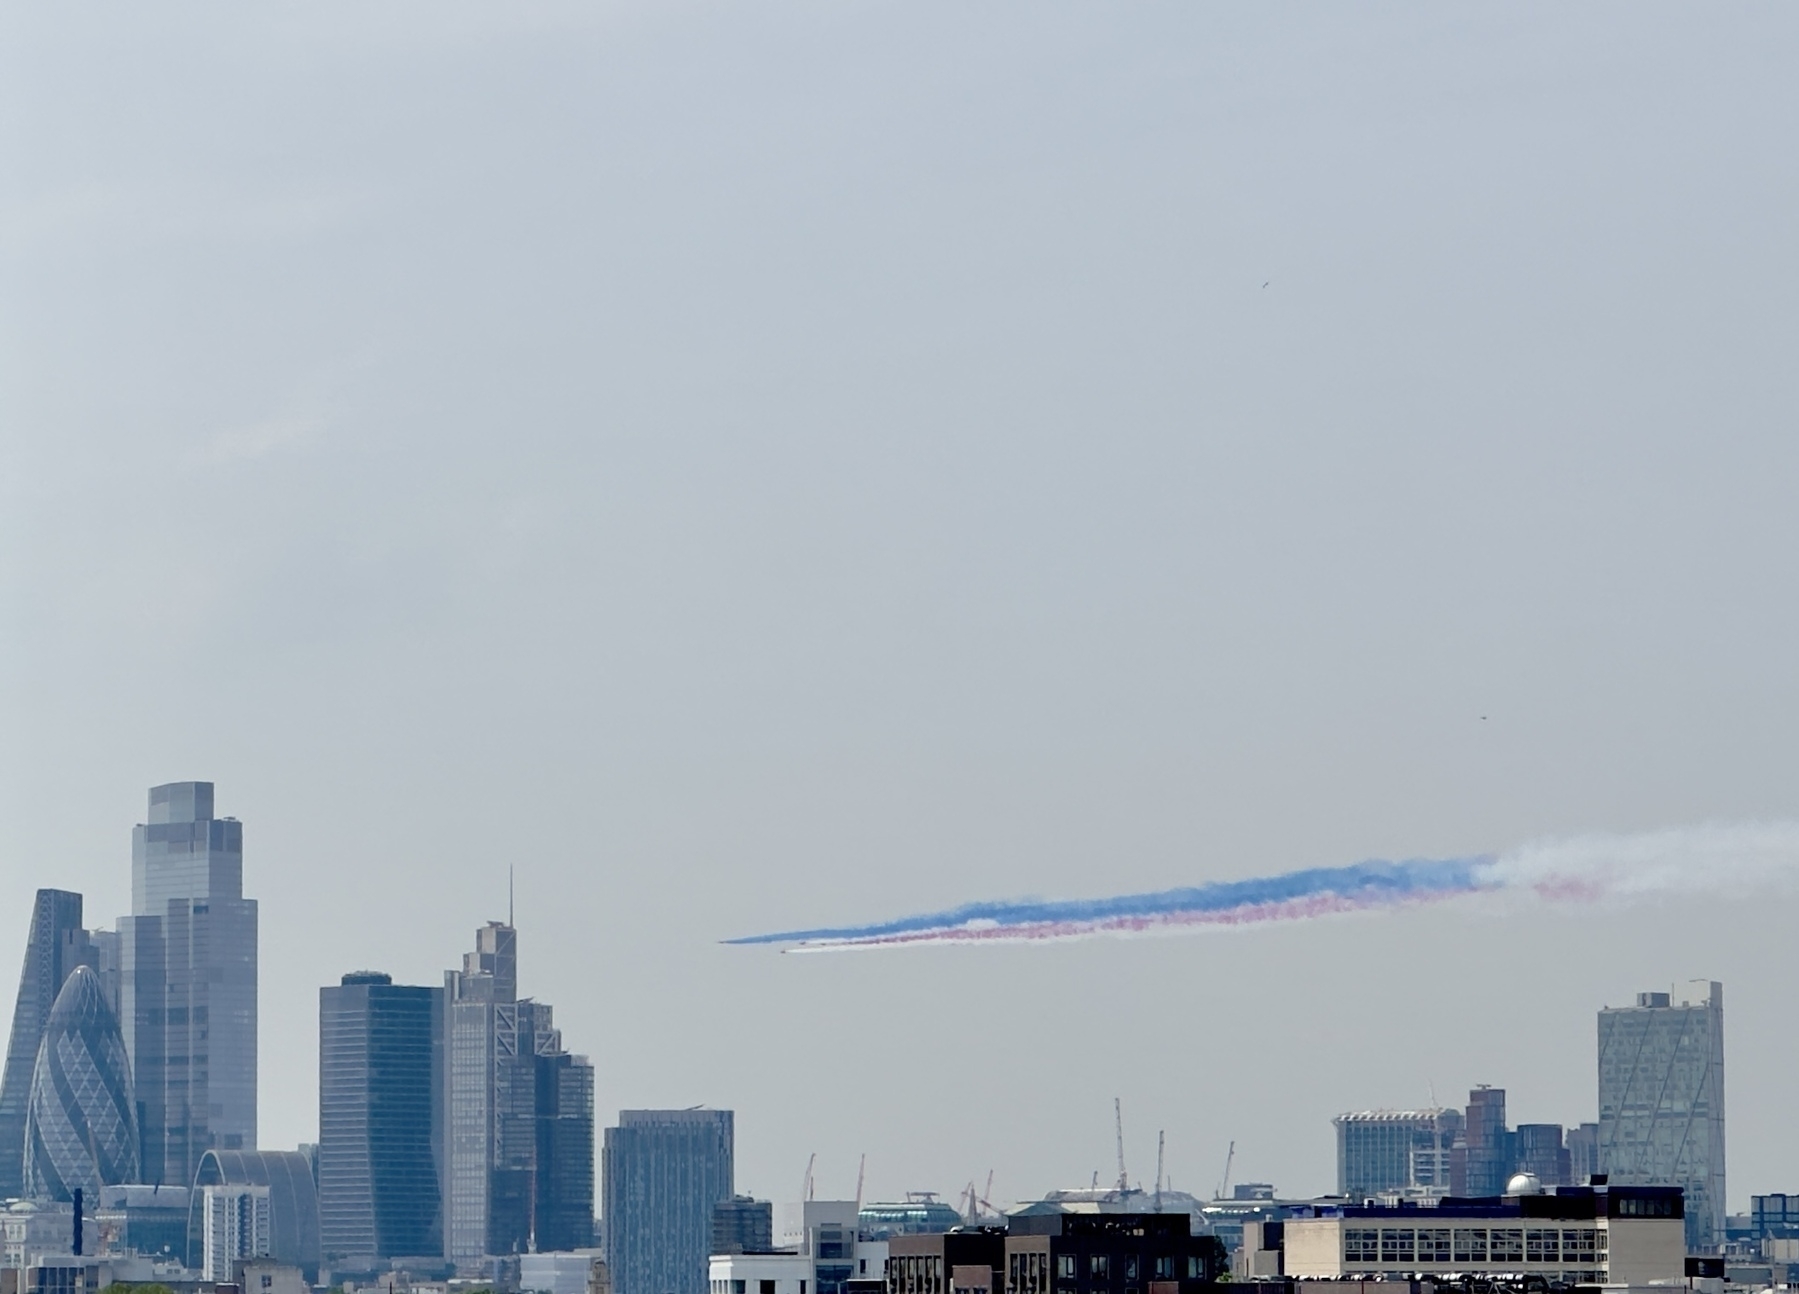 Jets from the Red Arrows flying over the City of London, trailing red, white, and blue smoke.